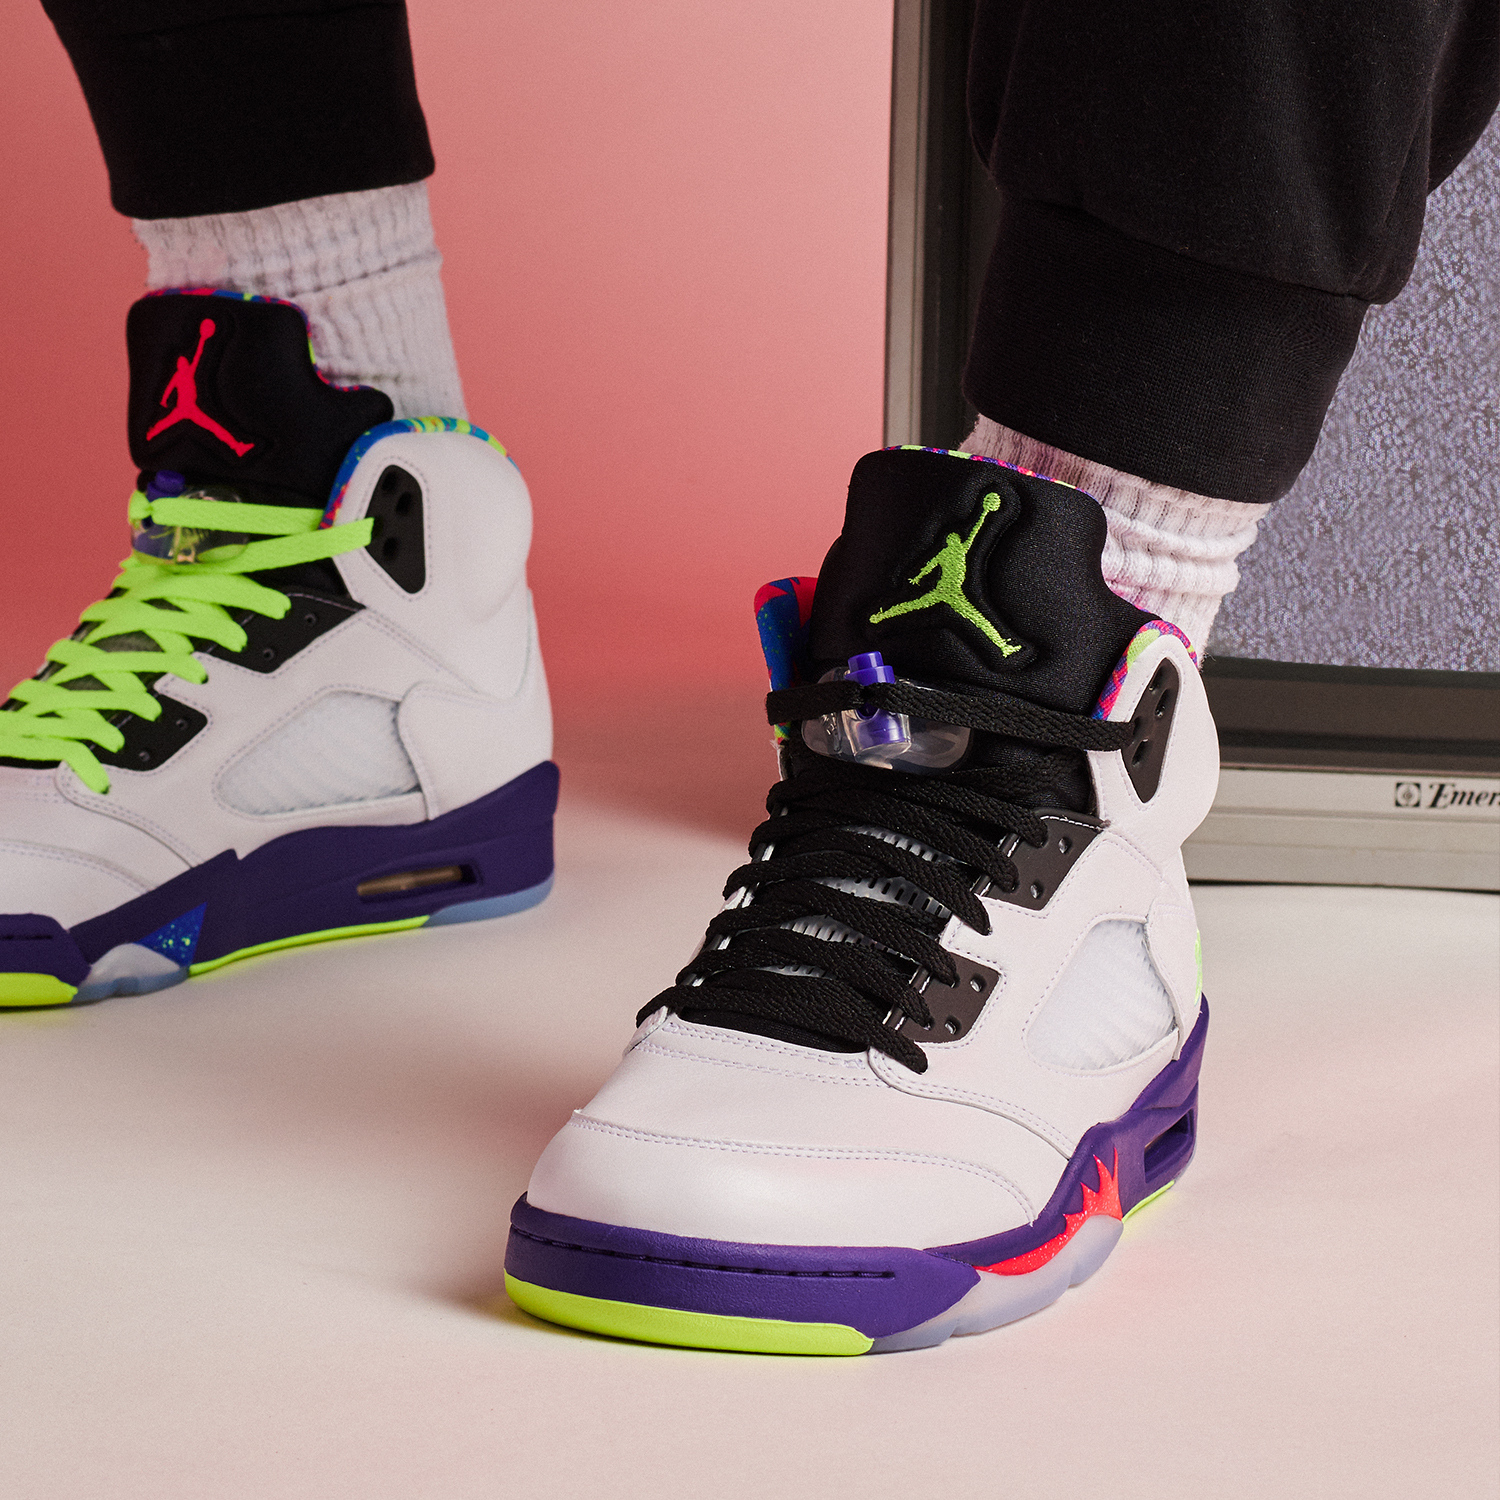 Jimmy Jazz on Twitter: "The Air Jordan 5 Bel-Air" offers a new twist on iconic 2013 inspired by "The Fresh Prince of Bel-Air," starring Will Smith. Releasing 8/15/20 on